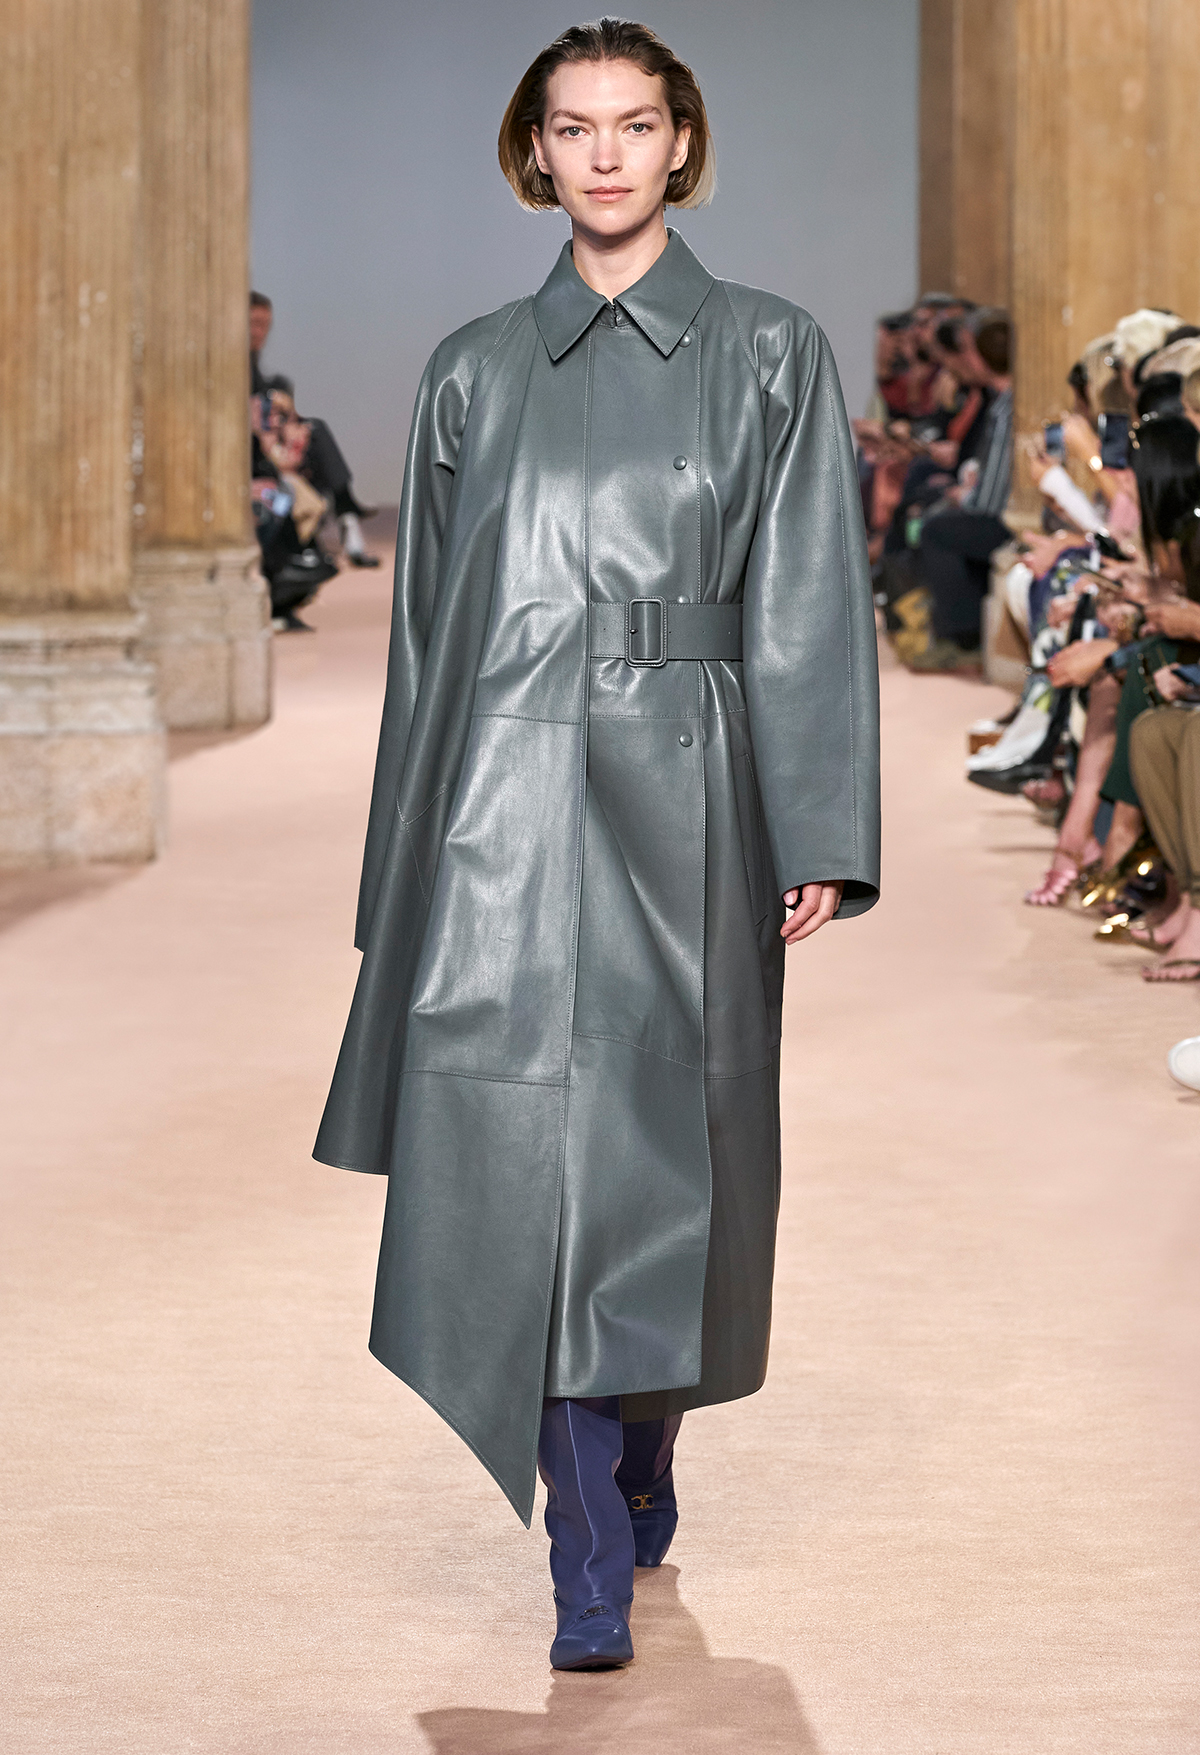 Autumn winter 2020 fashion trends: Leather coat